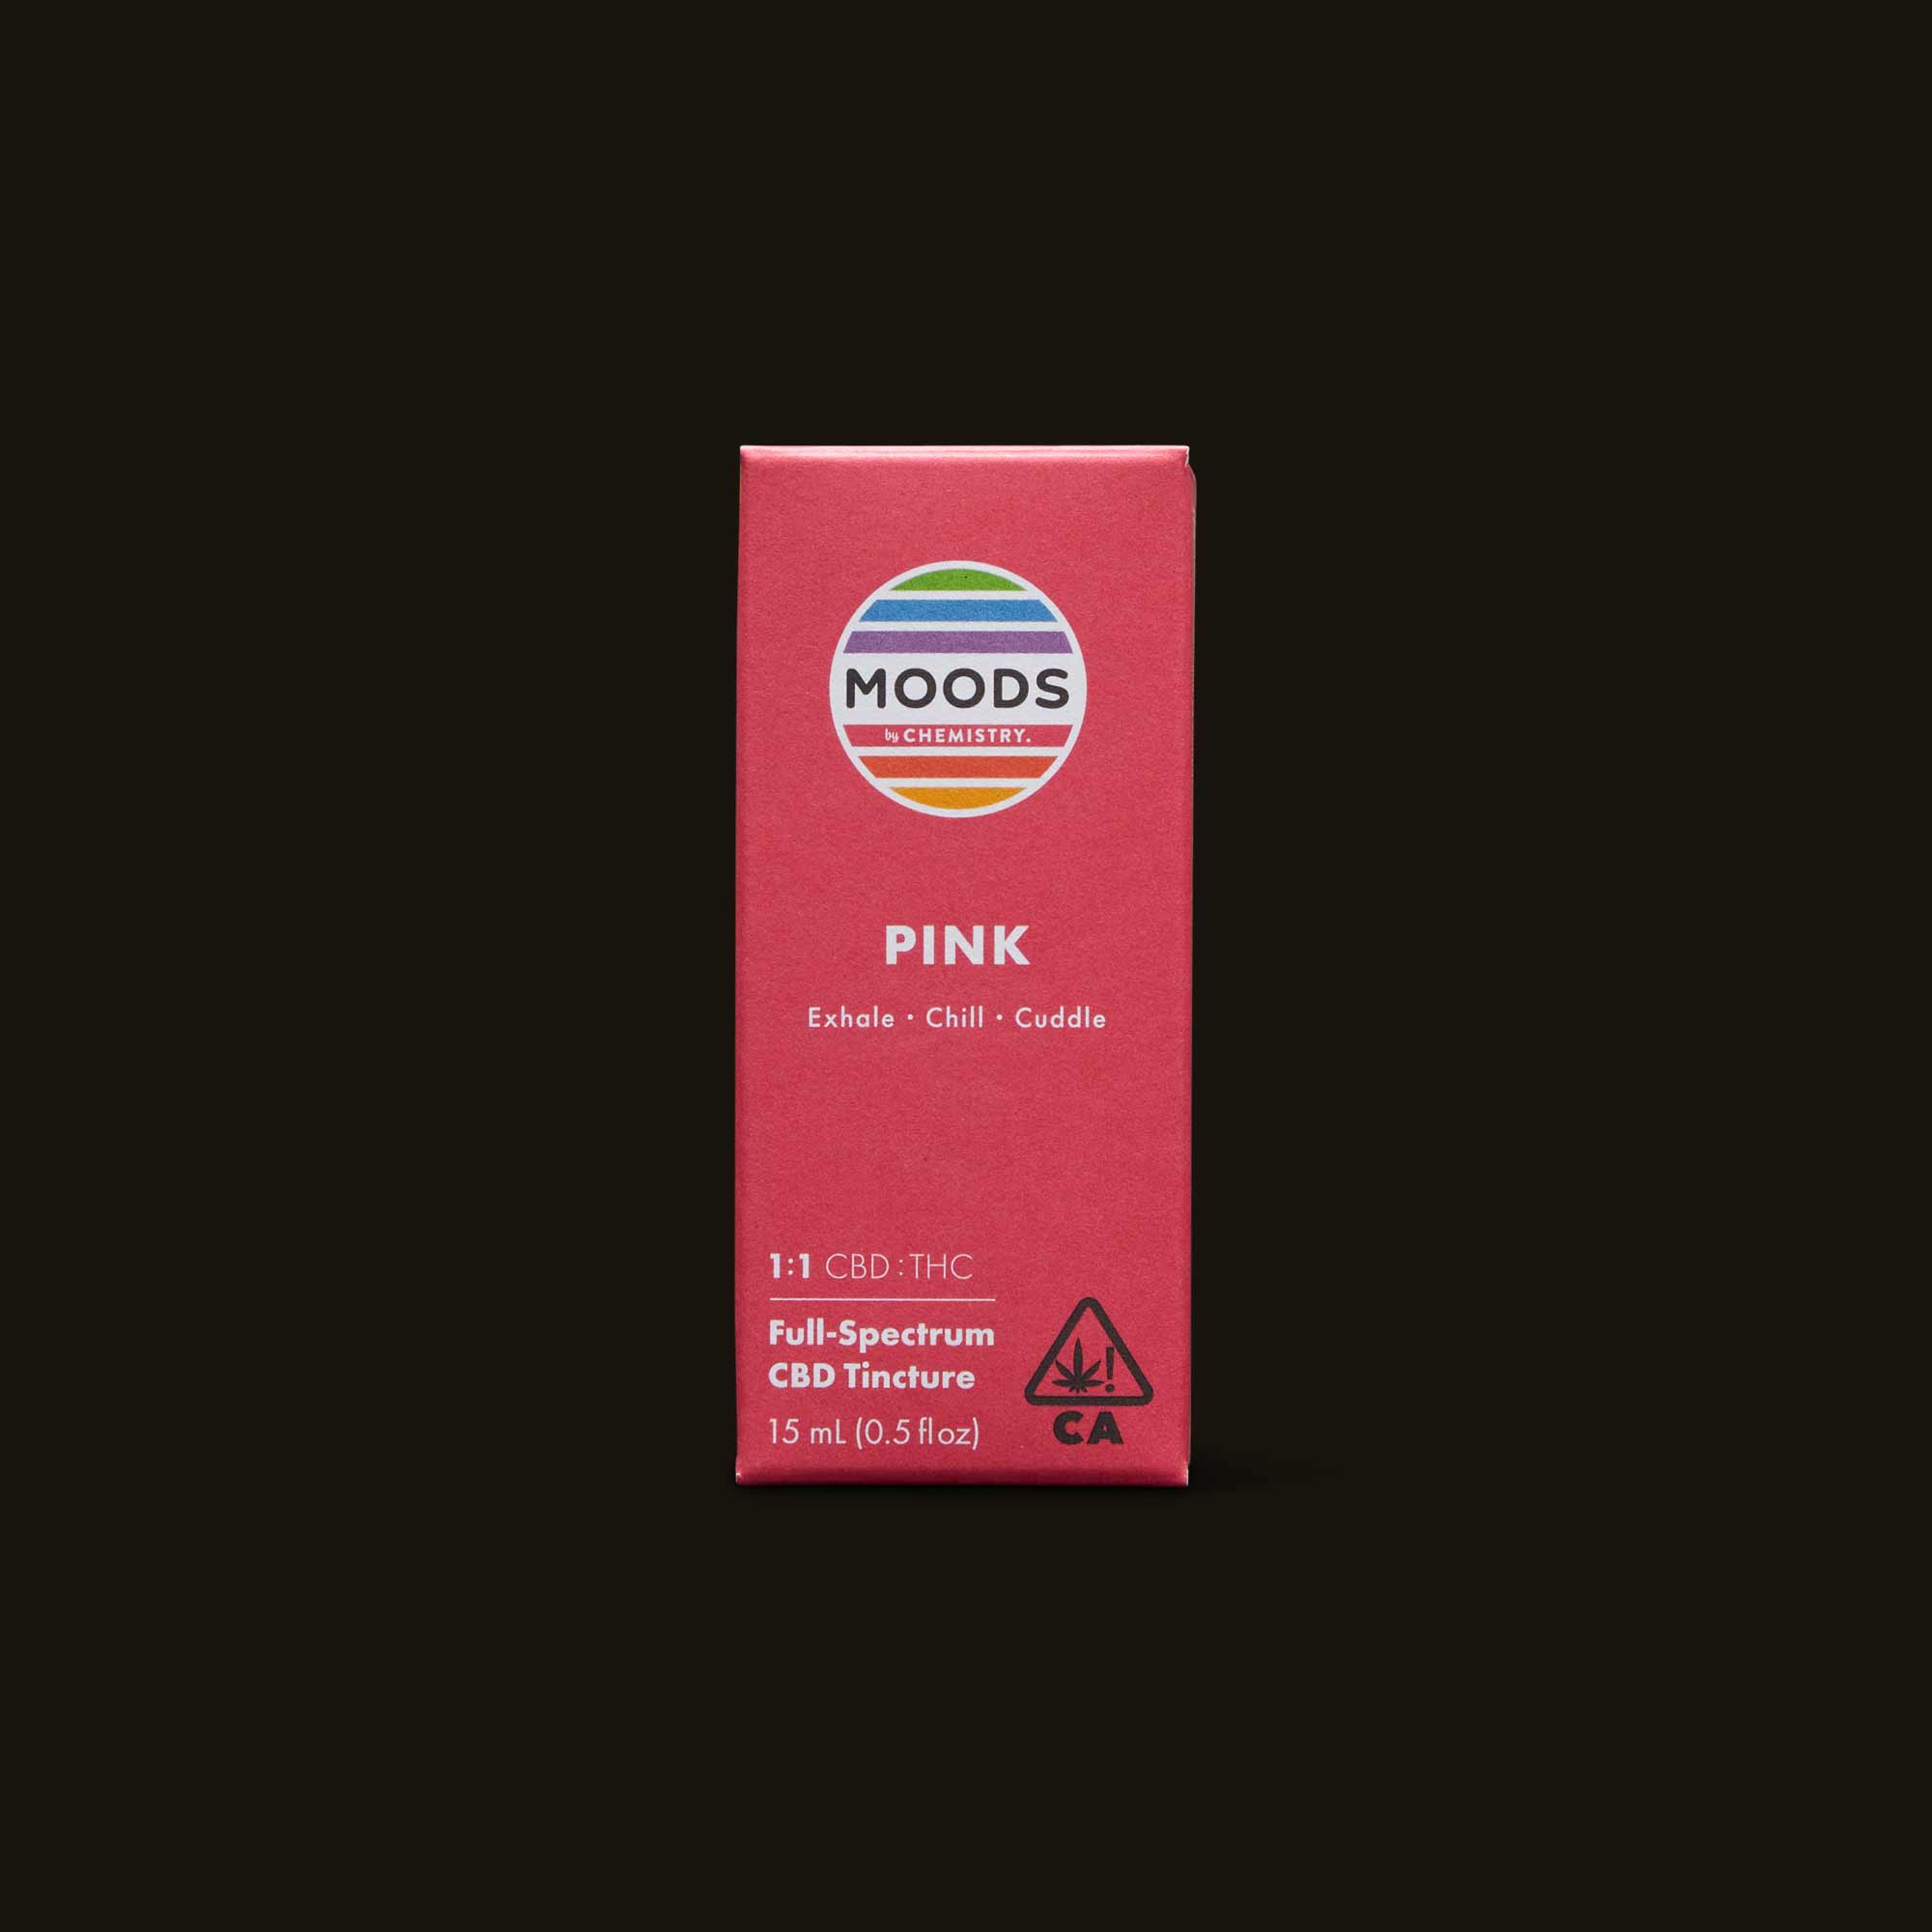 Chemisty-Pink-Moods-Tincture-Front-CA-1785-796495